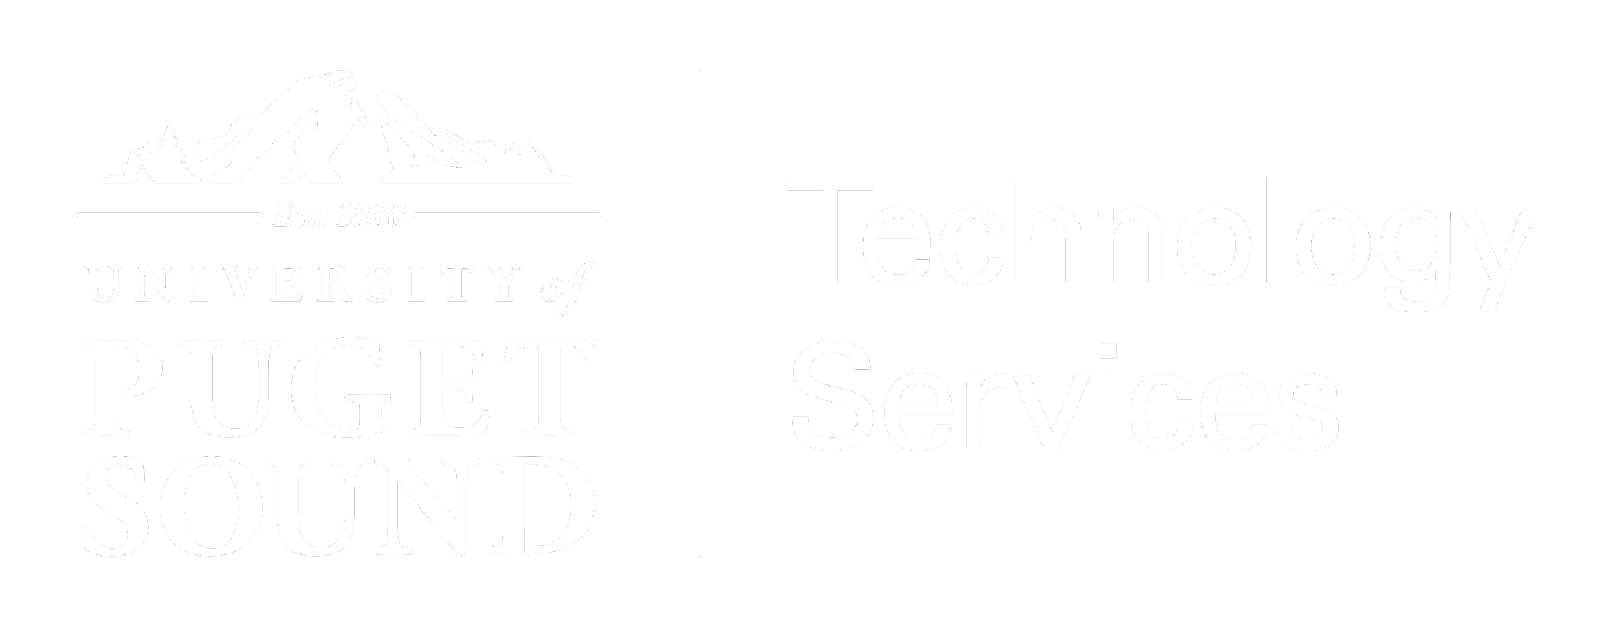 This logo identifies the Technology Services department within the University of Puget Sound